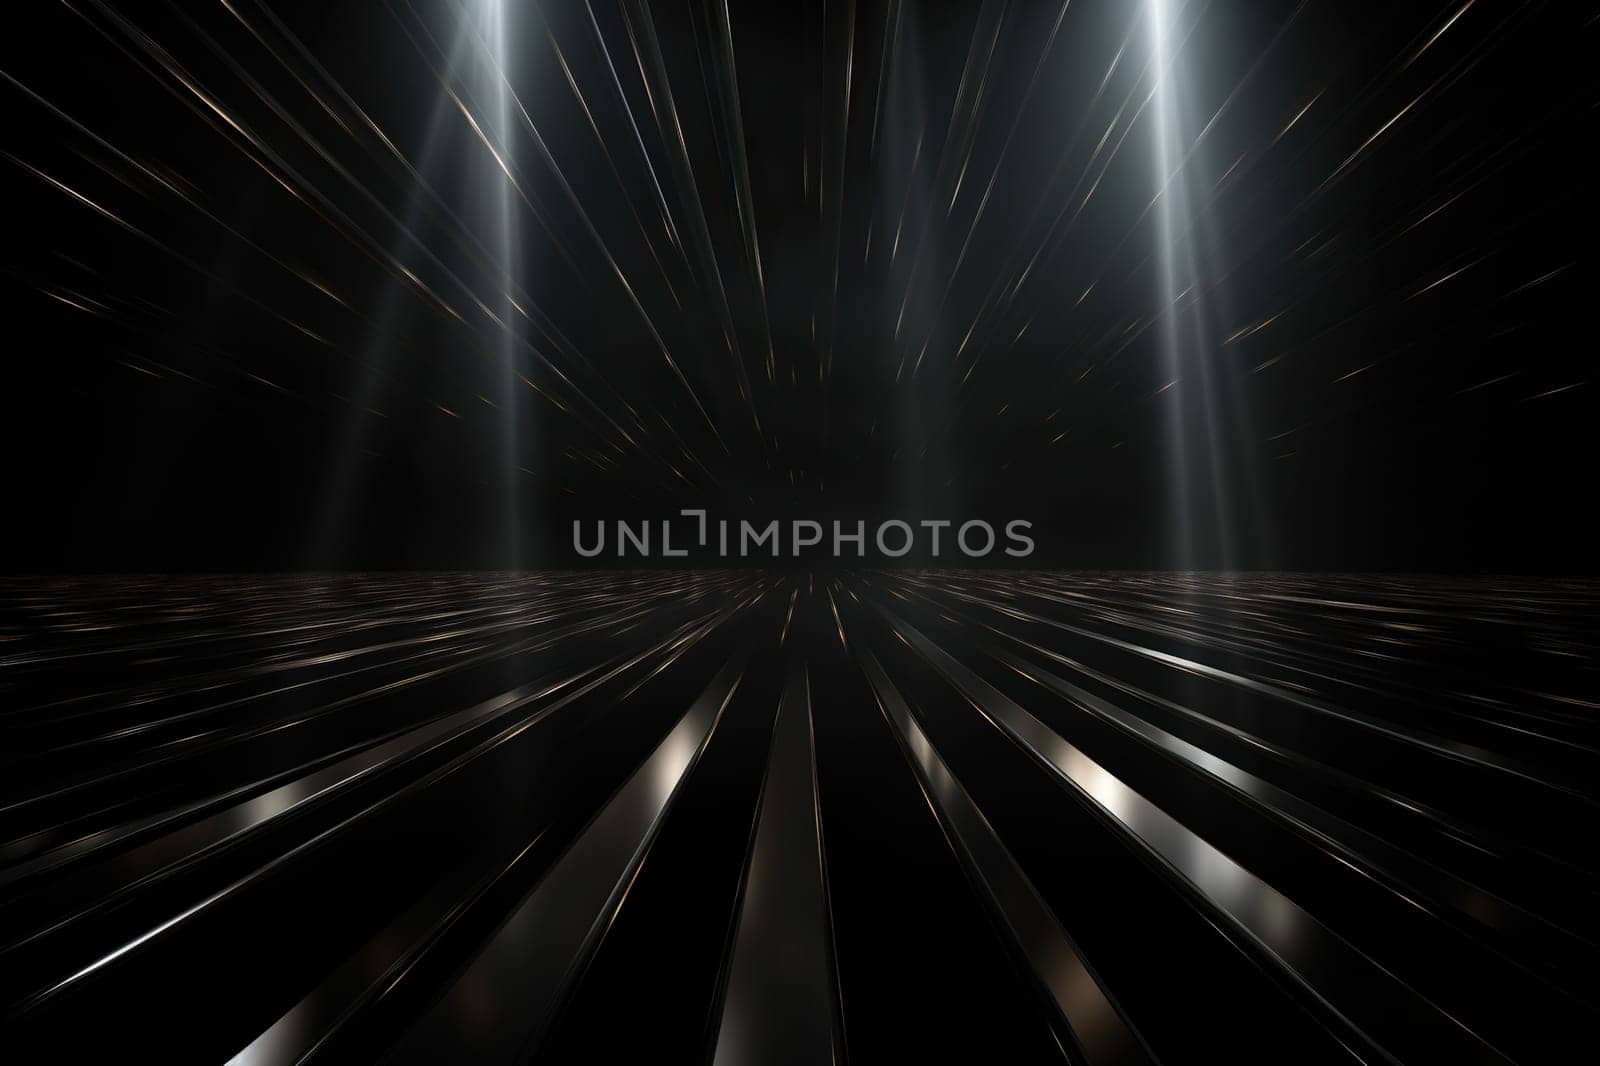 A dark tunnel with columns, illuminated by white neon rays. Abstract background.